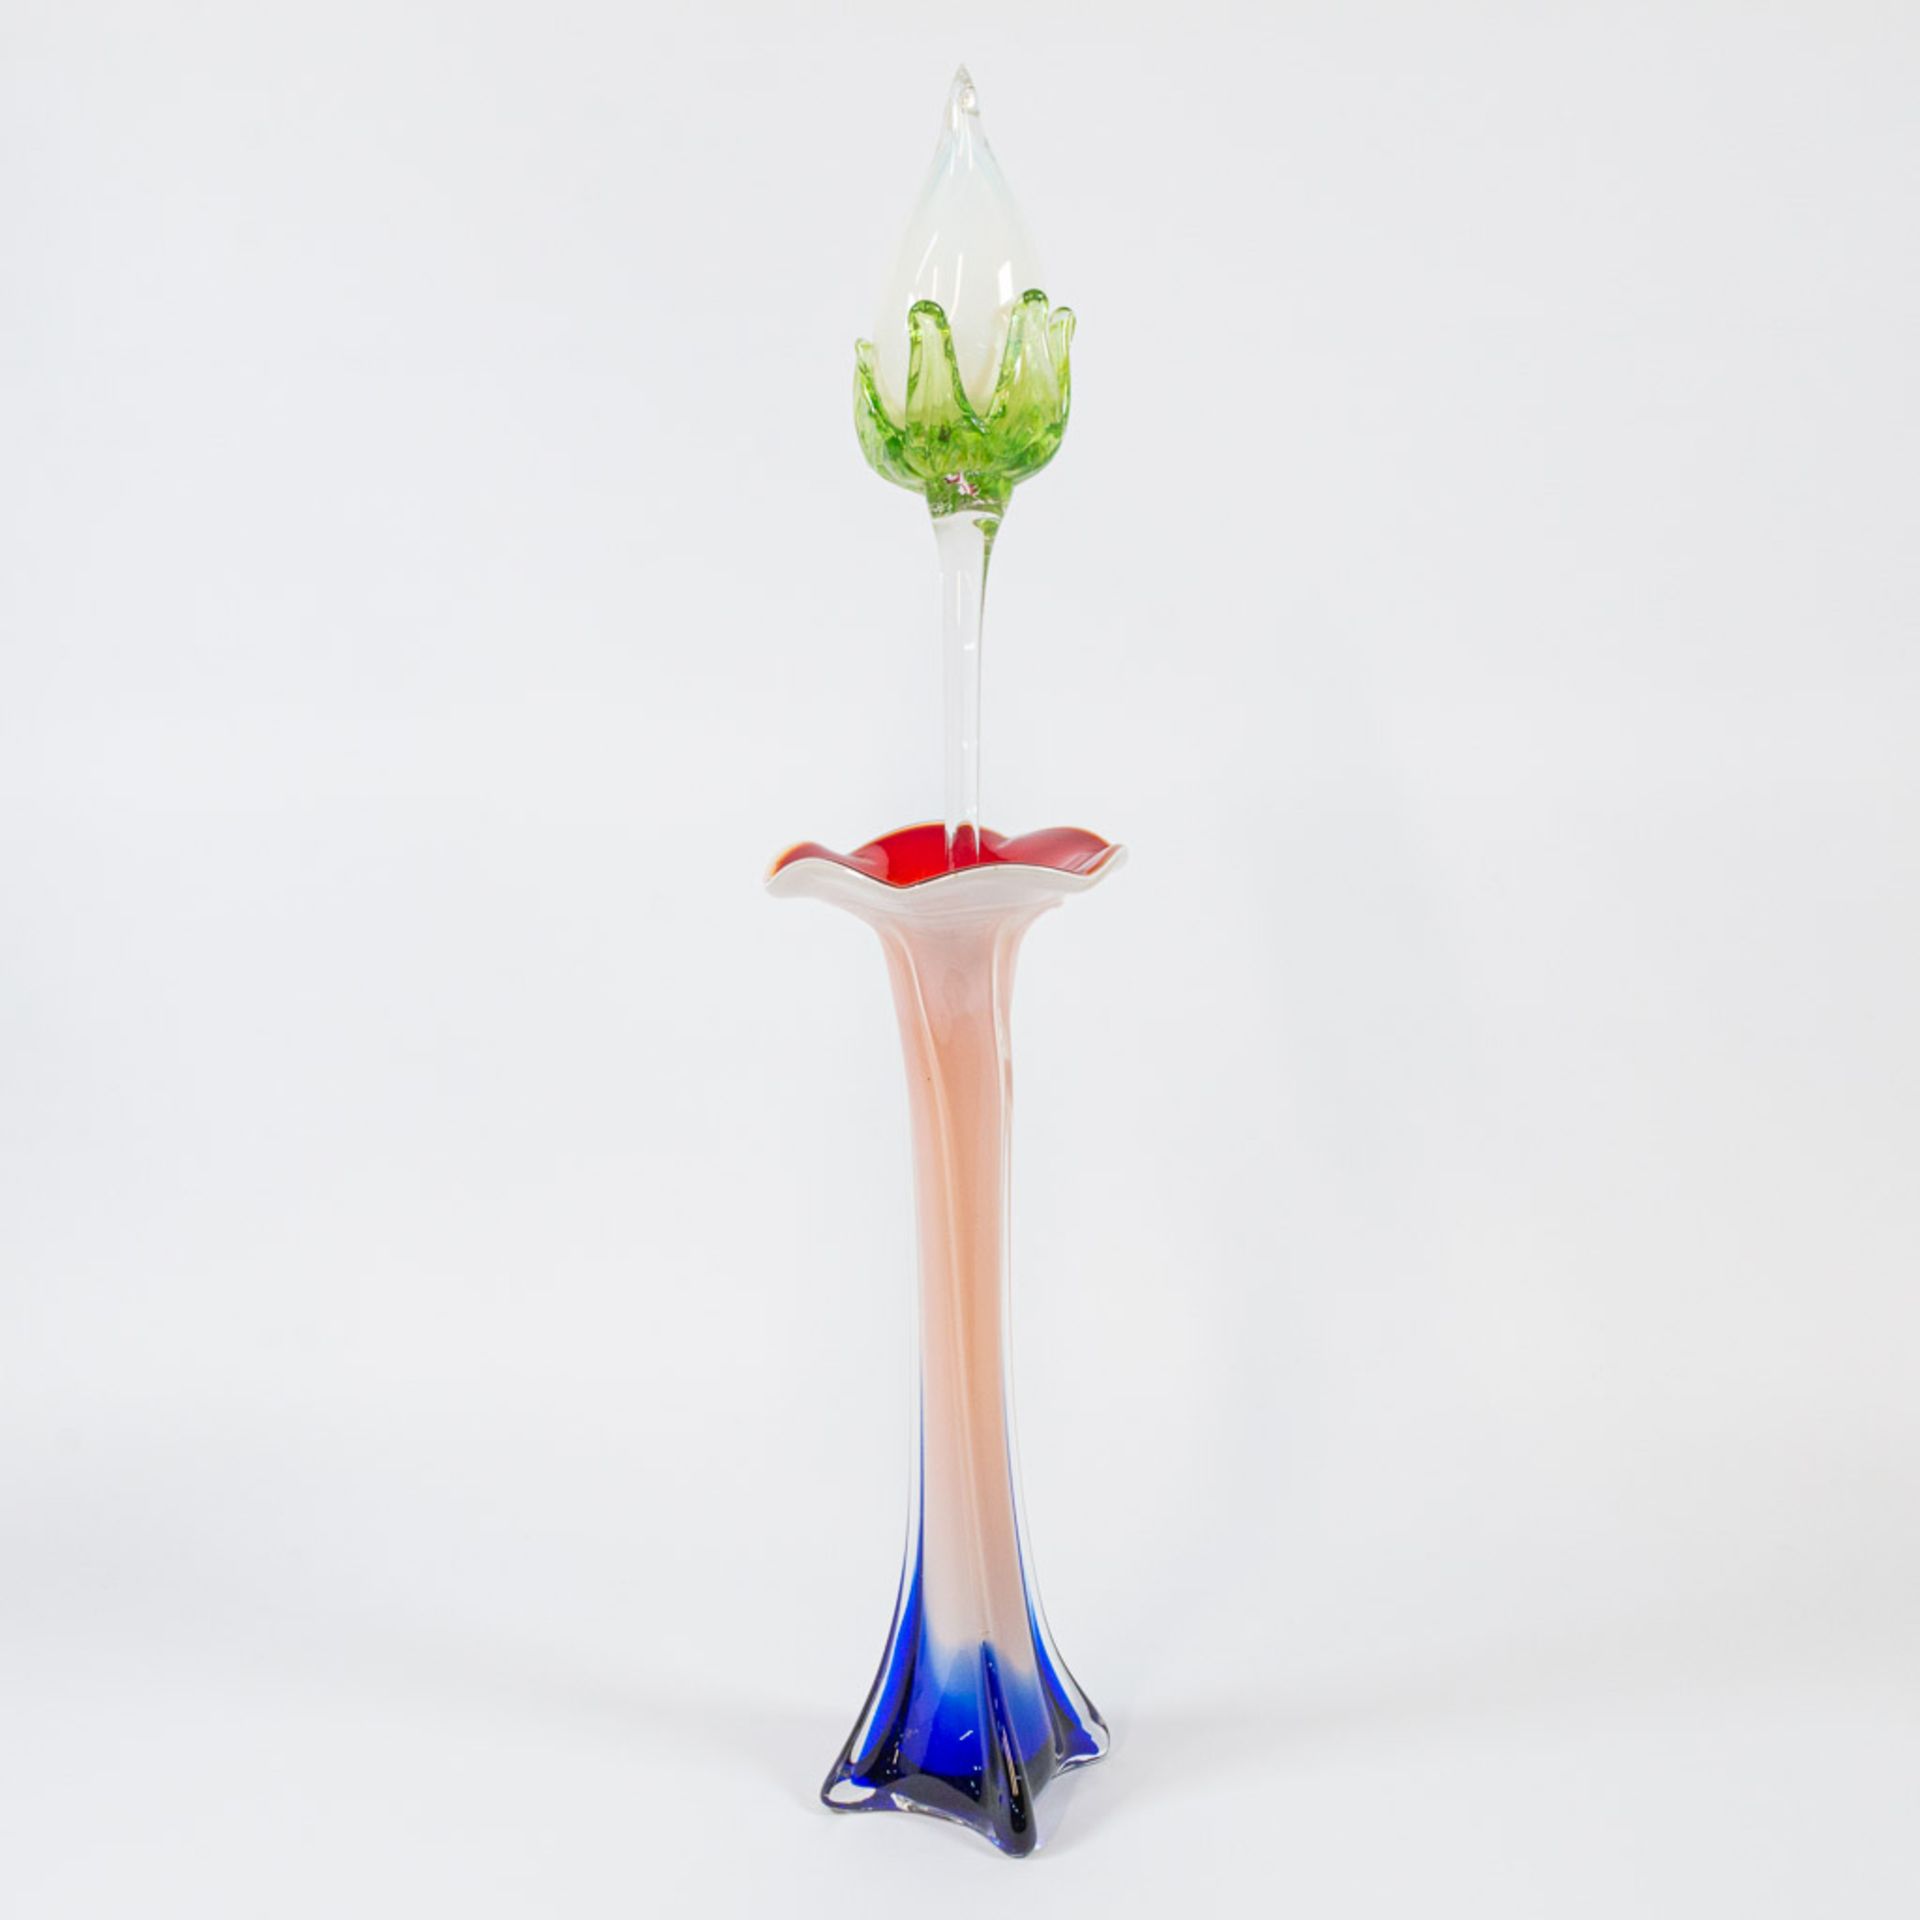 A collection of 4 vases and 4 glass flowers made in Murano, Italy. - Image 14 of 49